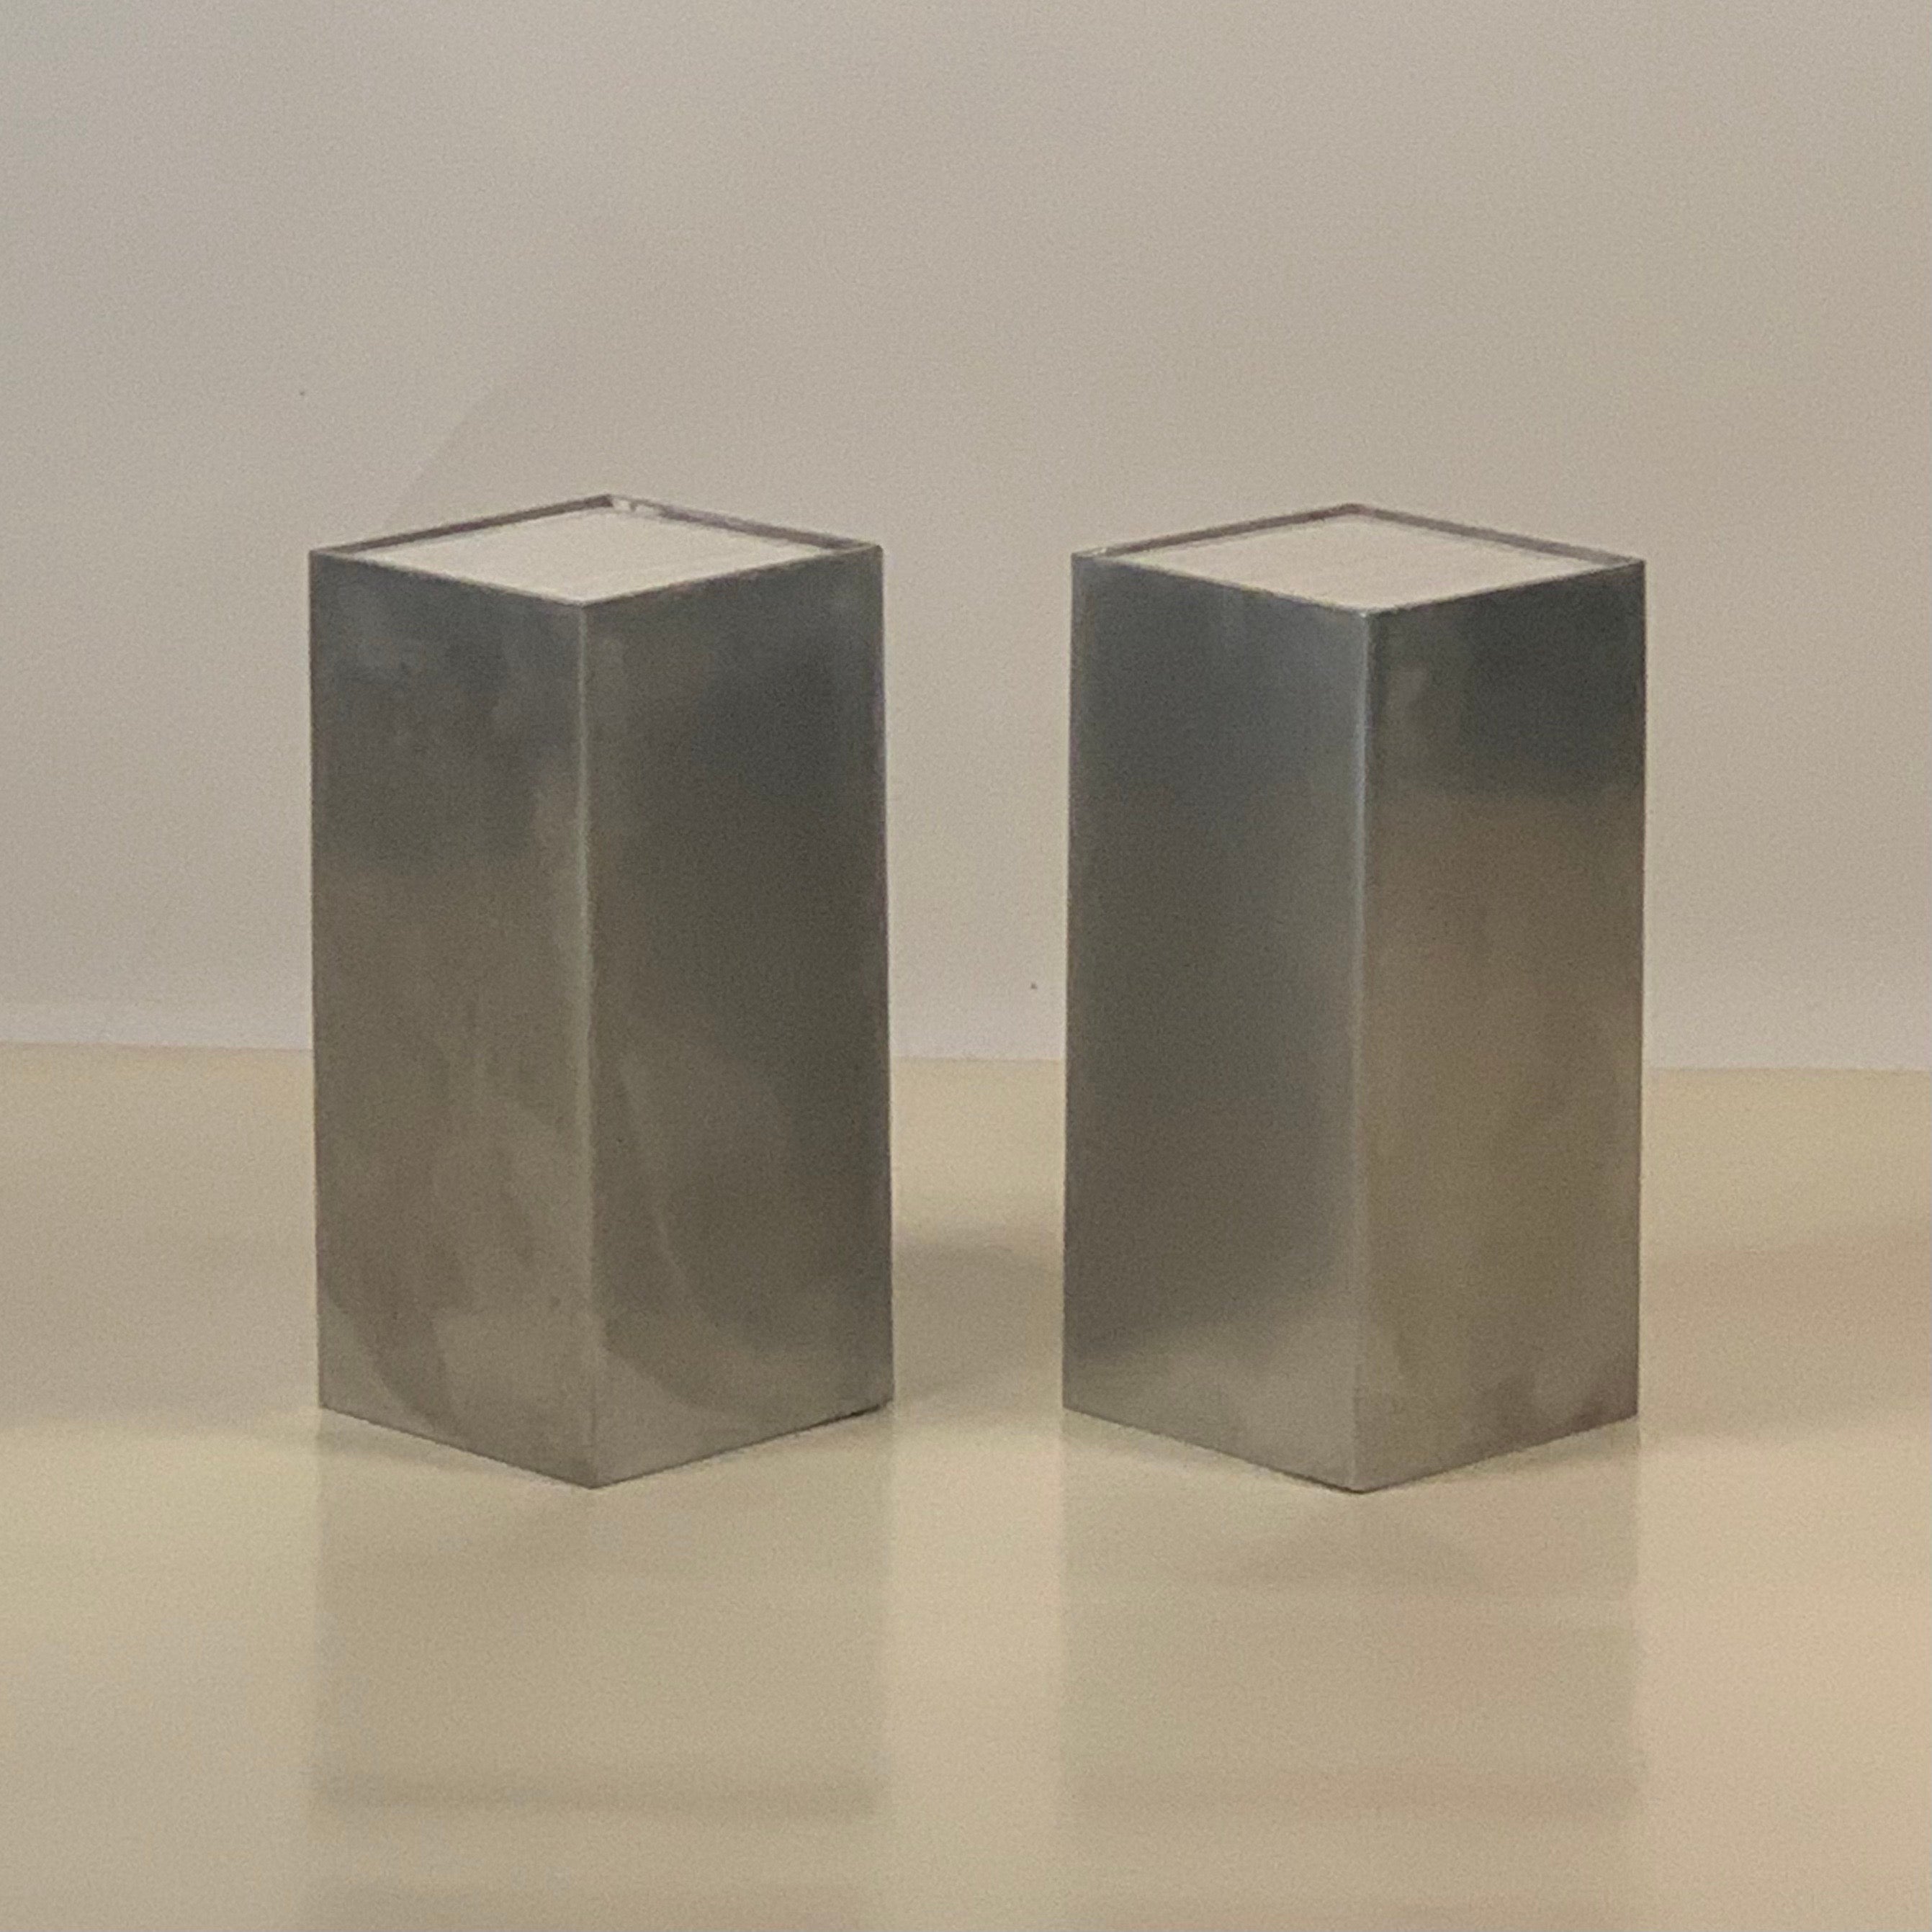 Pair of small polished aluminum plate and white onyx minimalist side or drinks tables in the style of Donald Judd.

Perfect next to armchairs or lounge chairs.